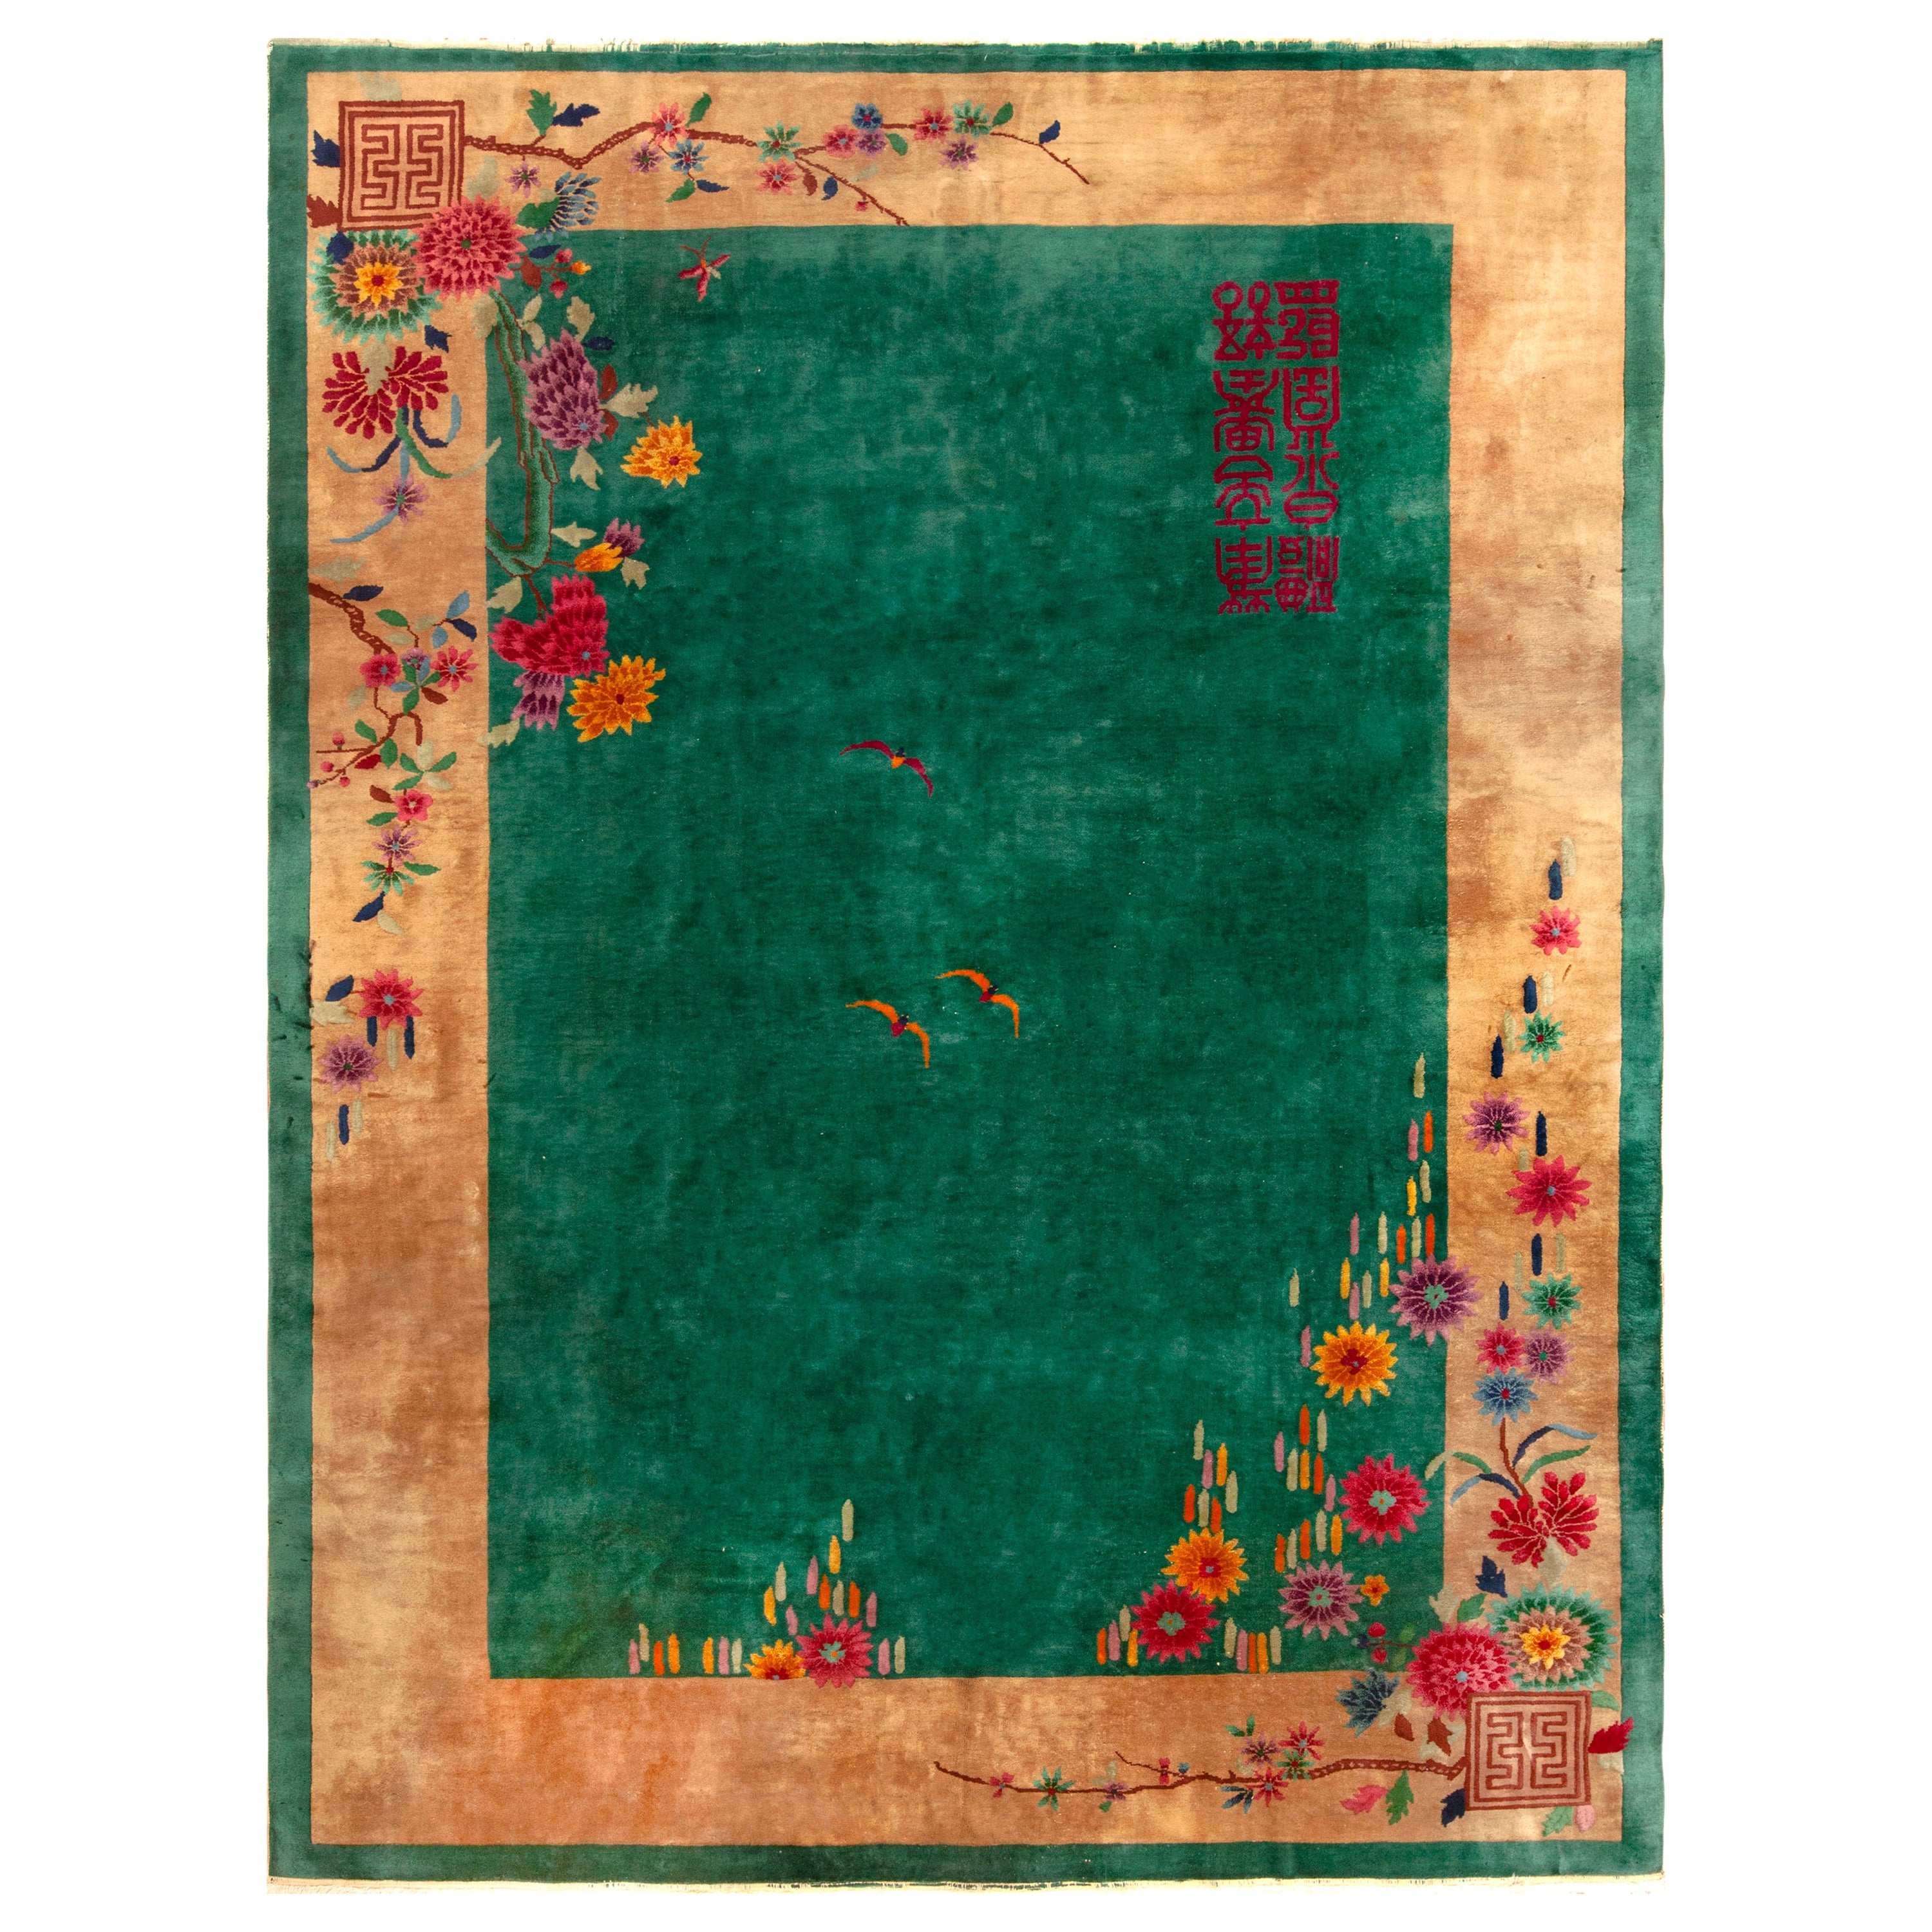 Gorgeous Antique Chinese Art Deco Rug In Green 9' x 11'7" For Sale